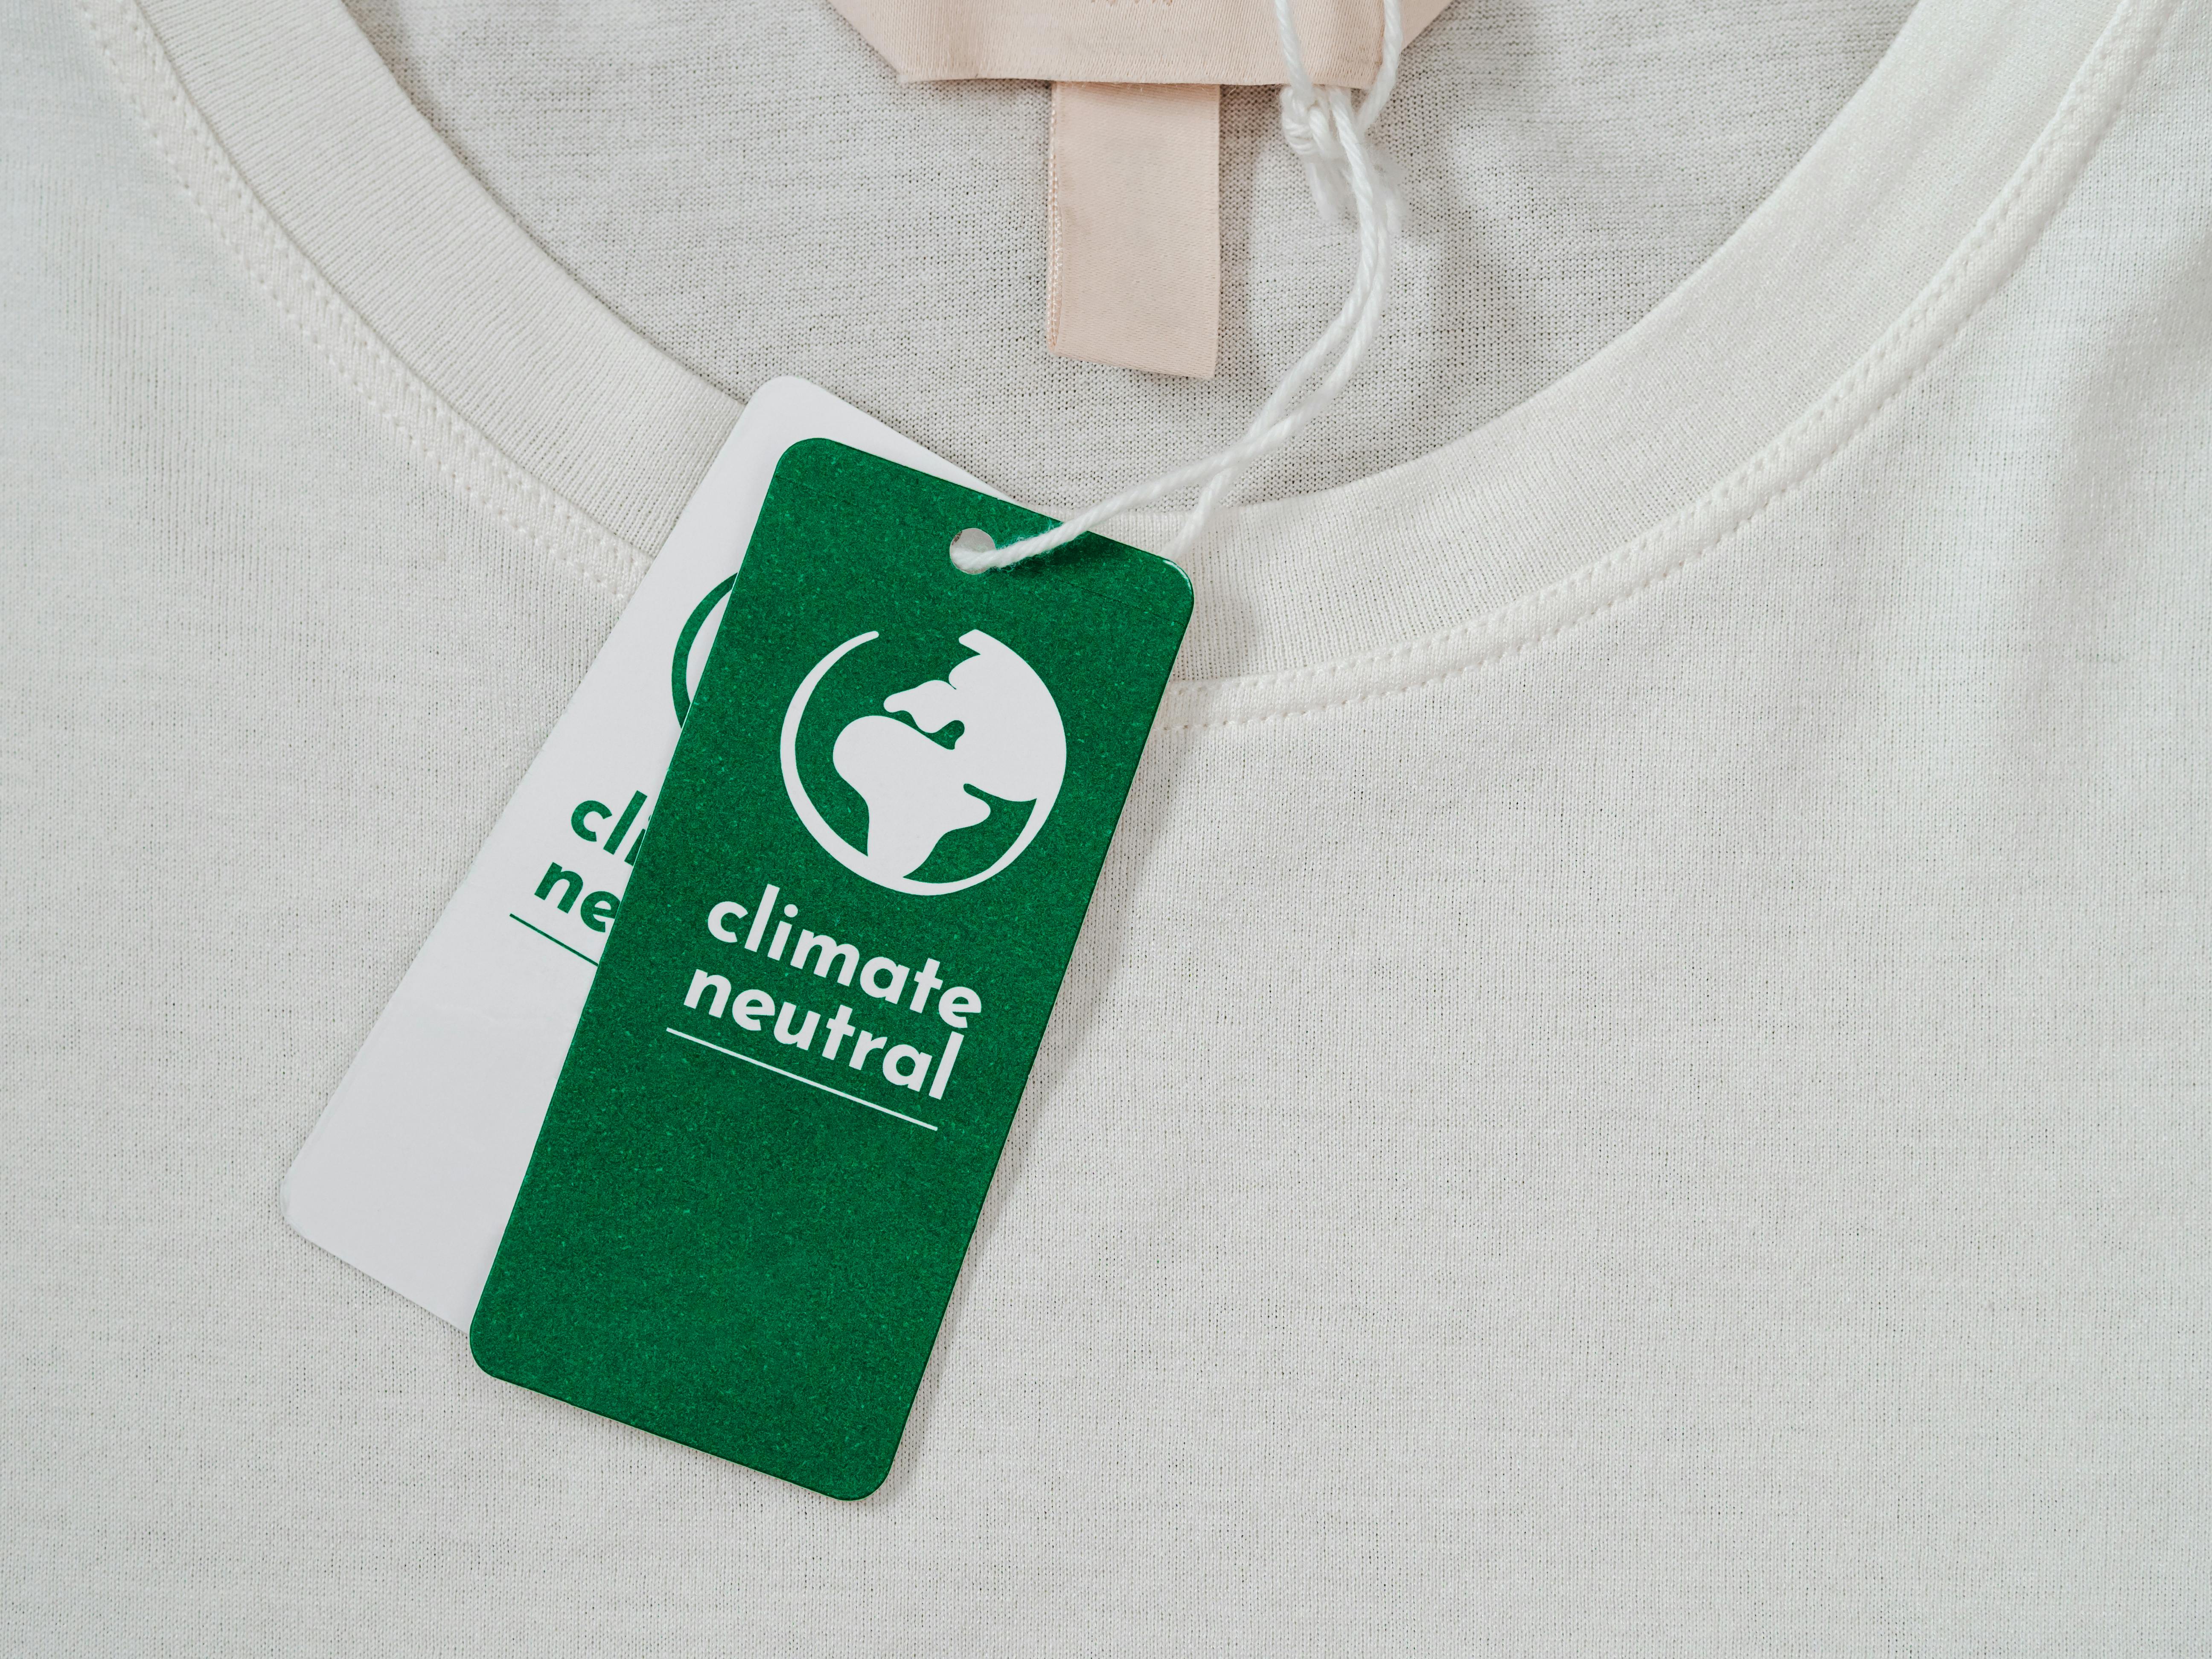  close up of a climate neutral label on a tshirt